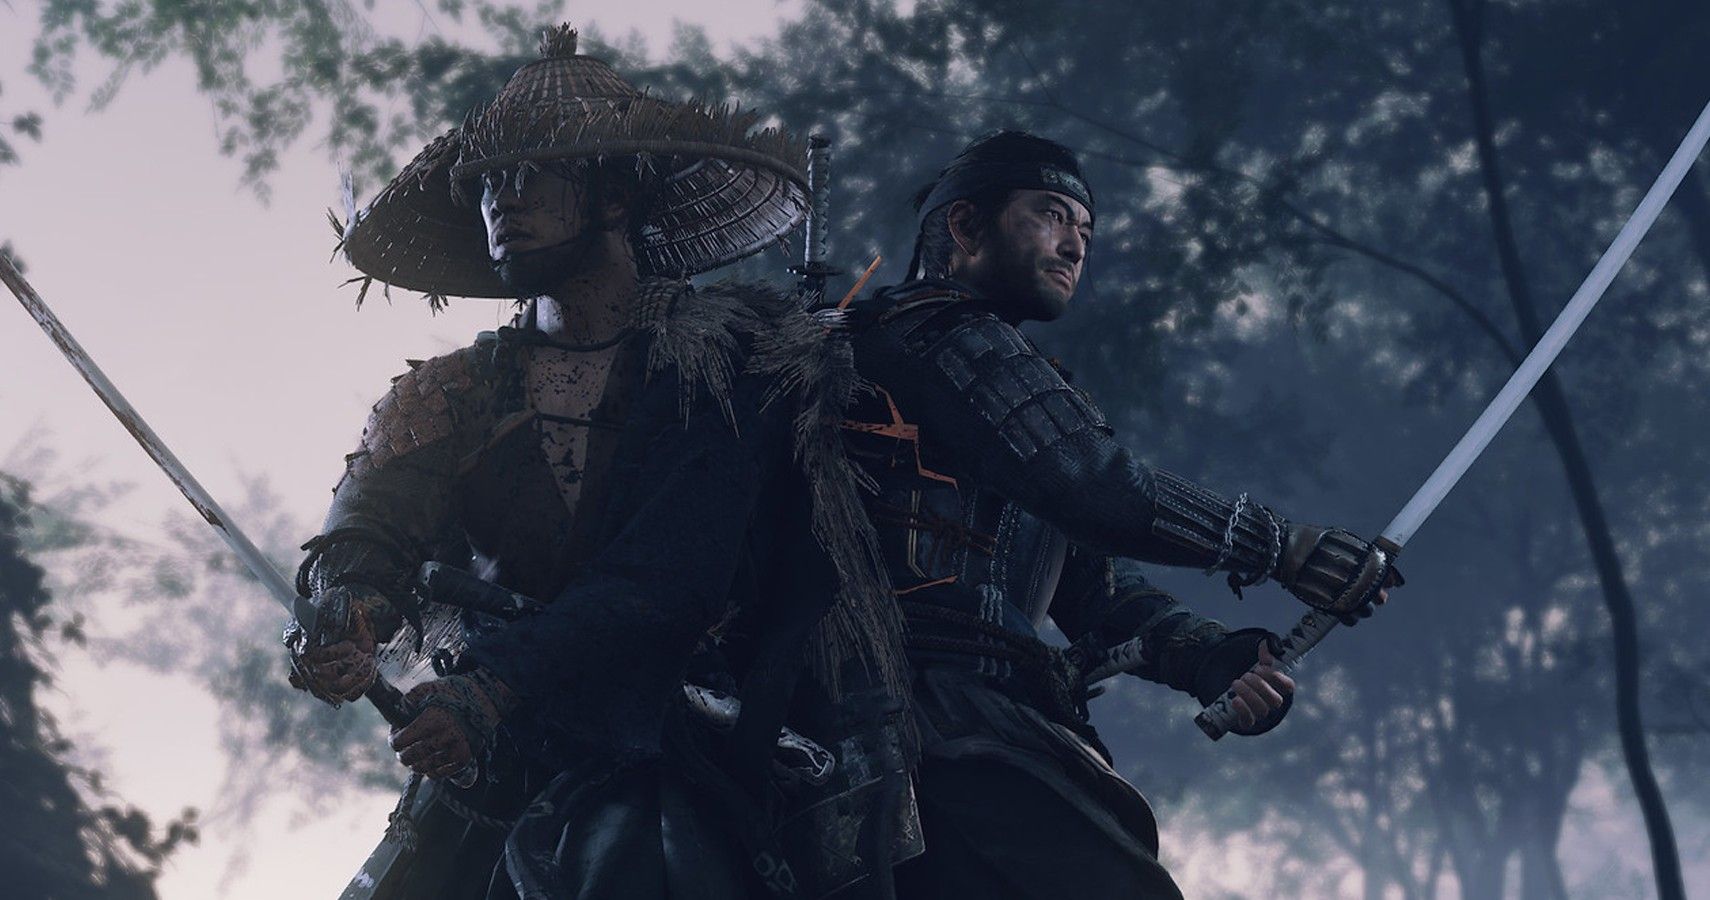 how to dress like sly cooper in ghost of tsushima